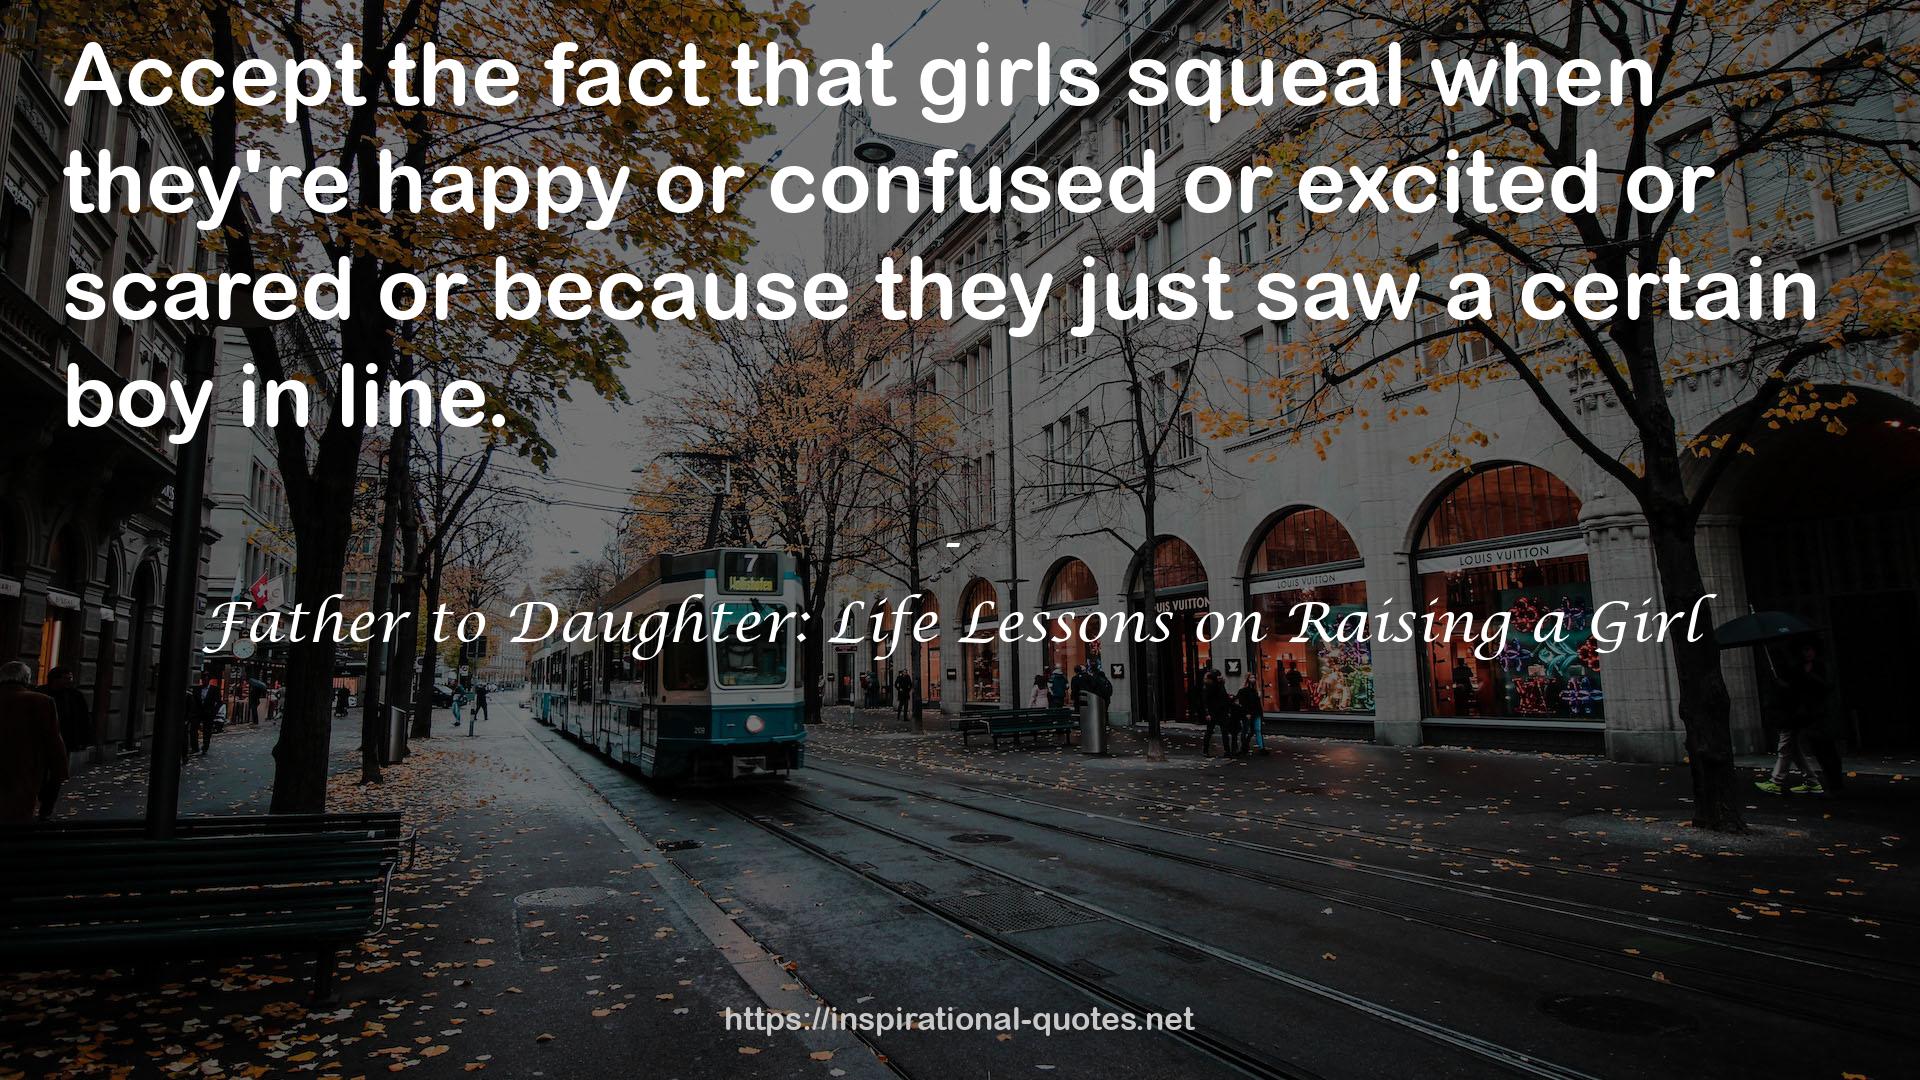 Father to Daughter: Life Lessons on Raising a Girl QUOTES